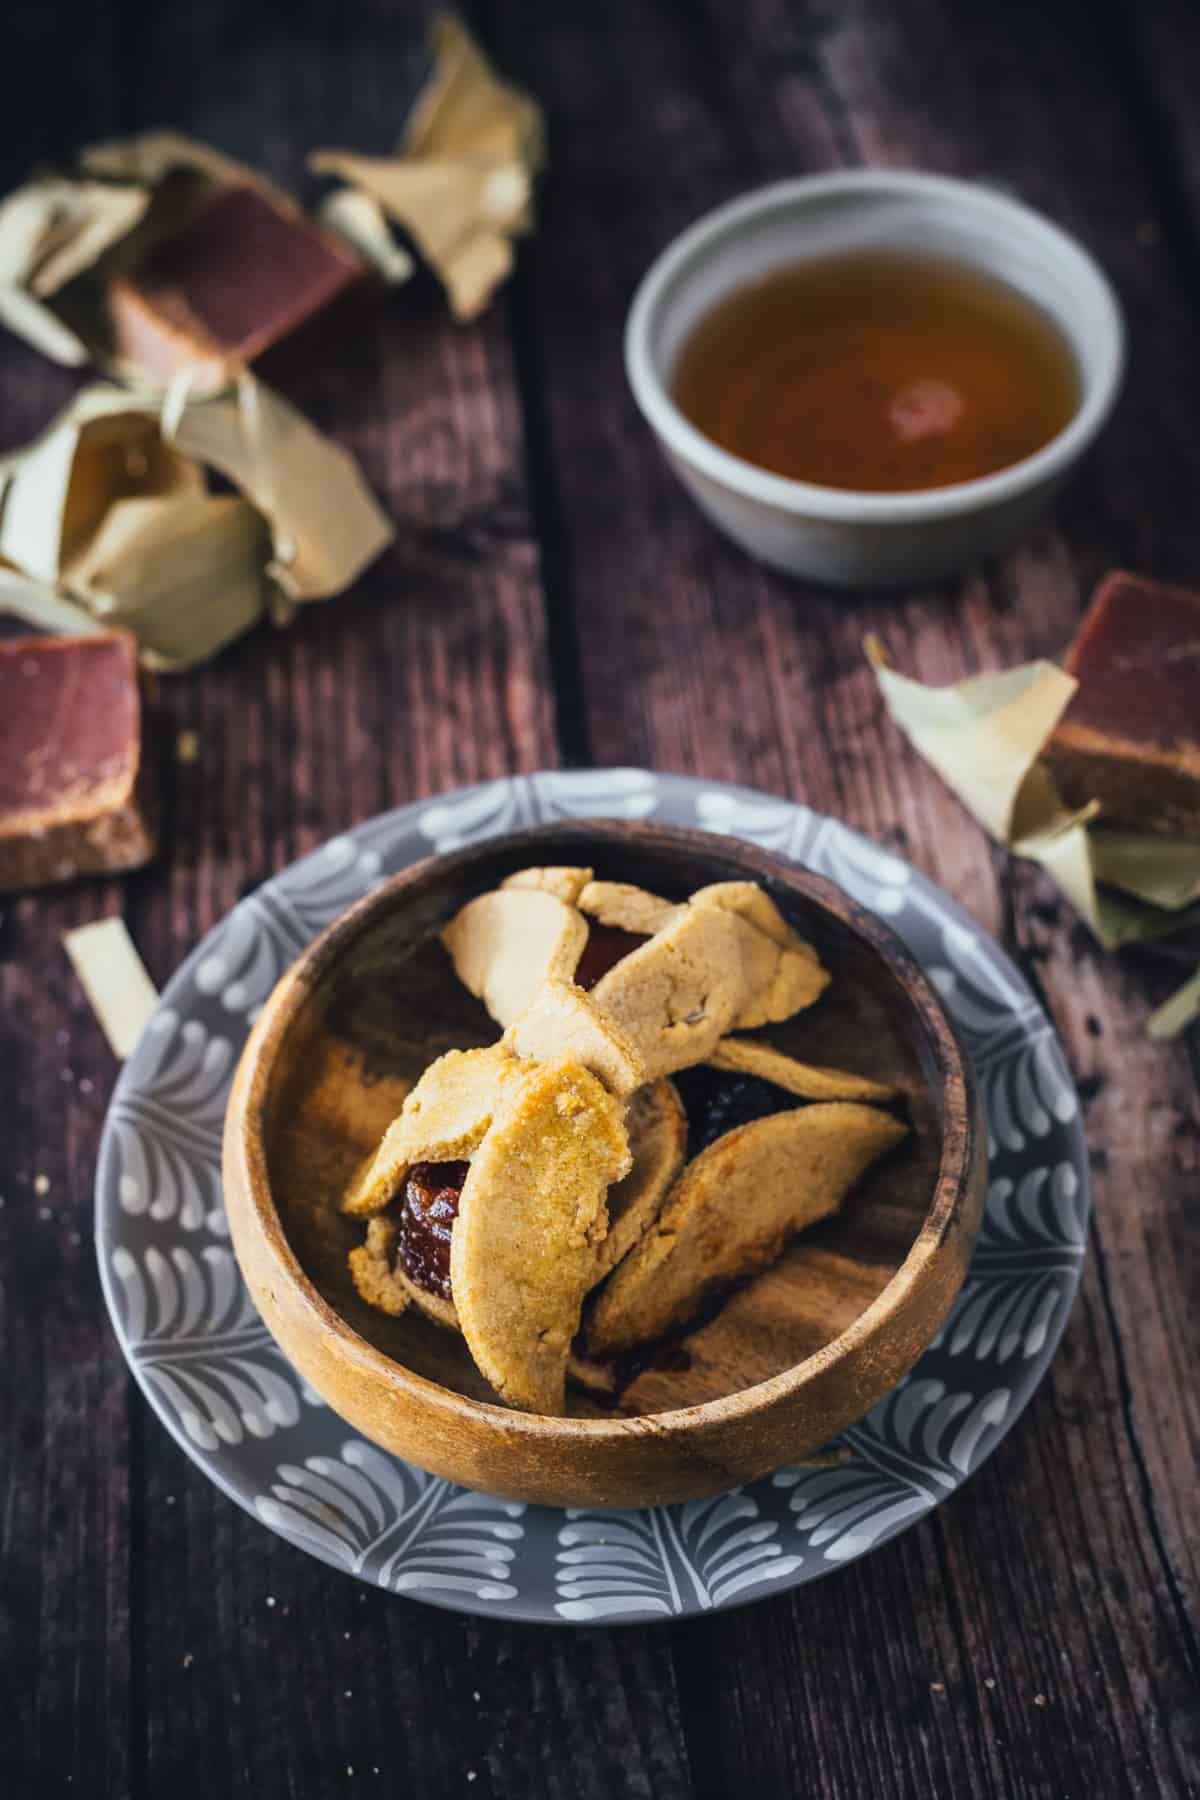 A bowl of freshly baked cookies and Cheese Hamantaschen served on a patterned plate with pieces of chocolate and a cup of tea in the background, displayed on a rustic wooden surface.